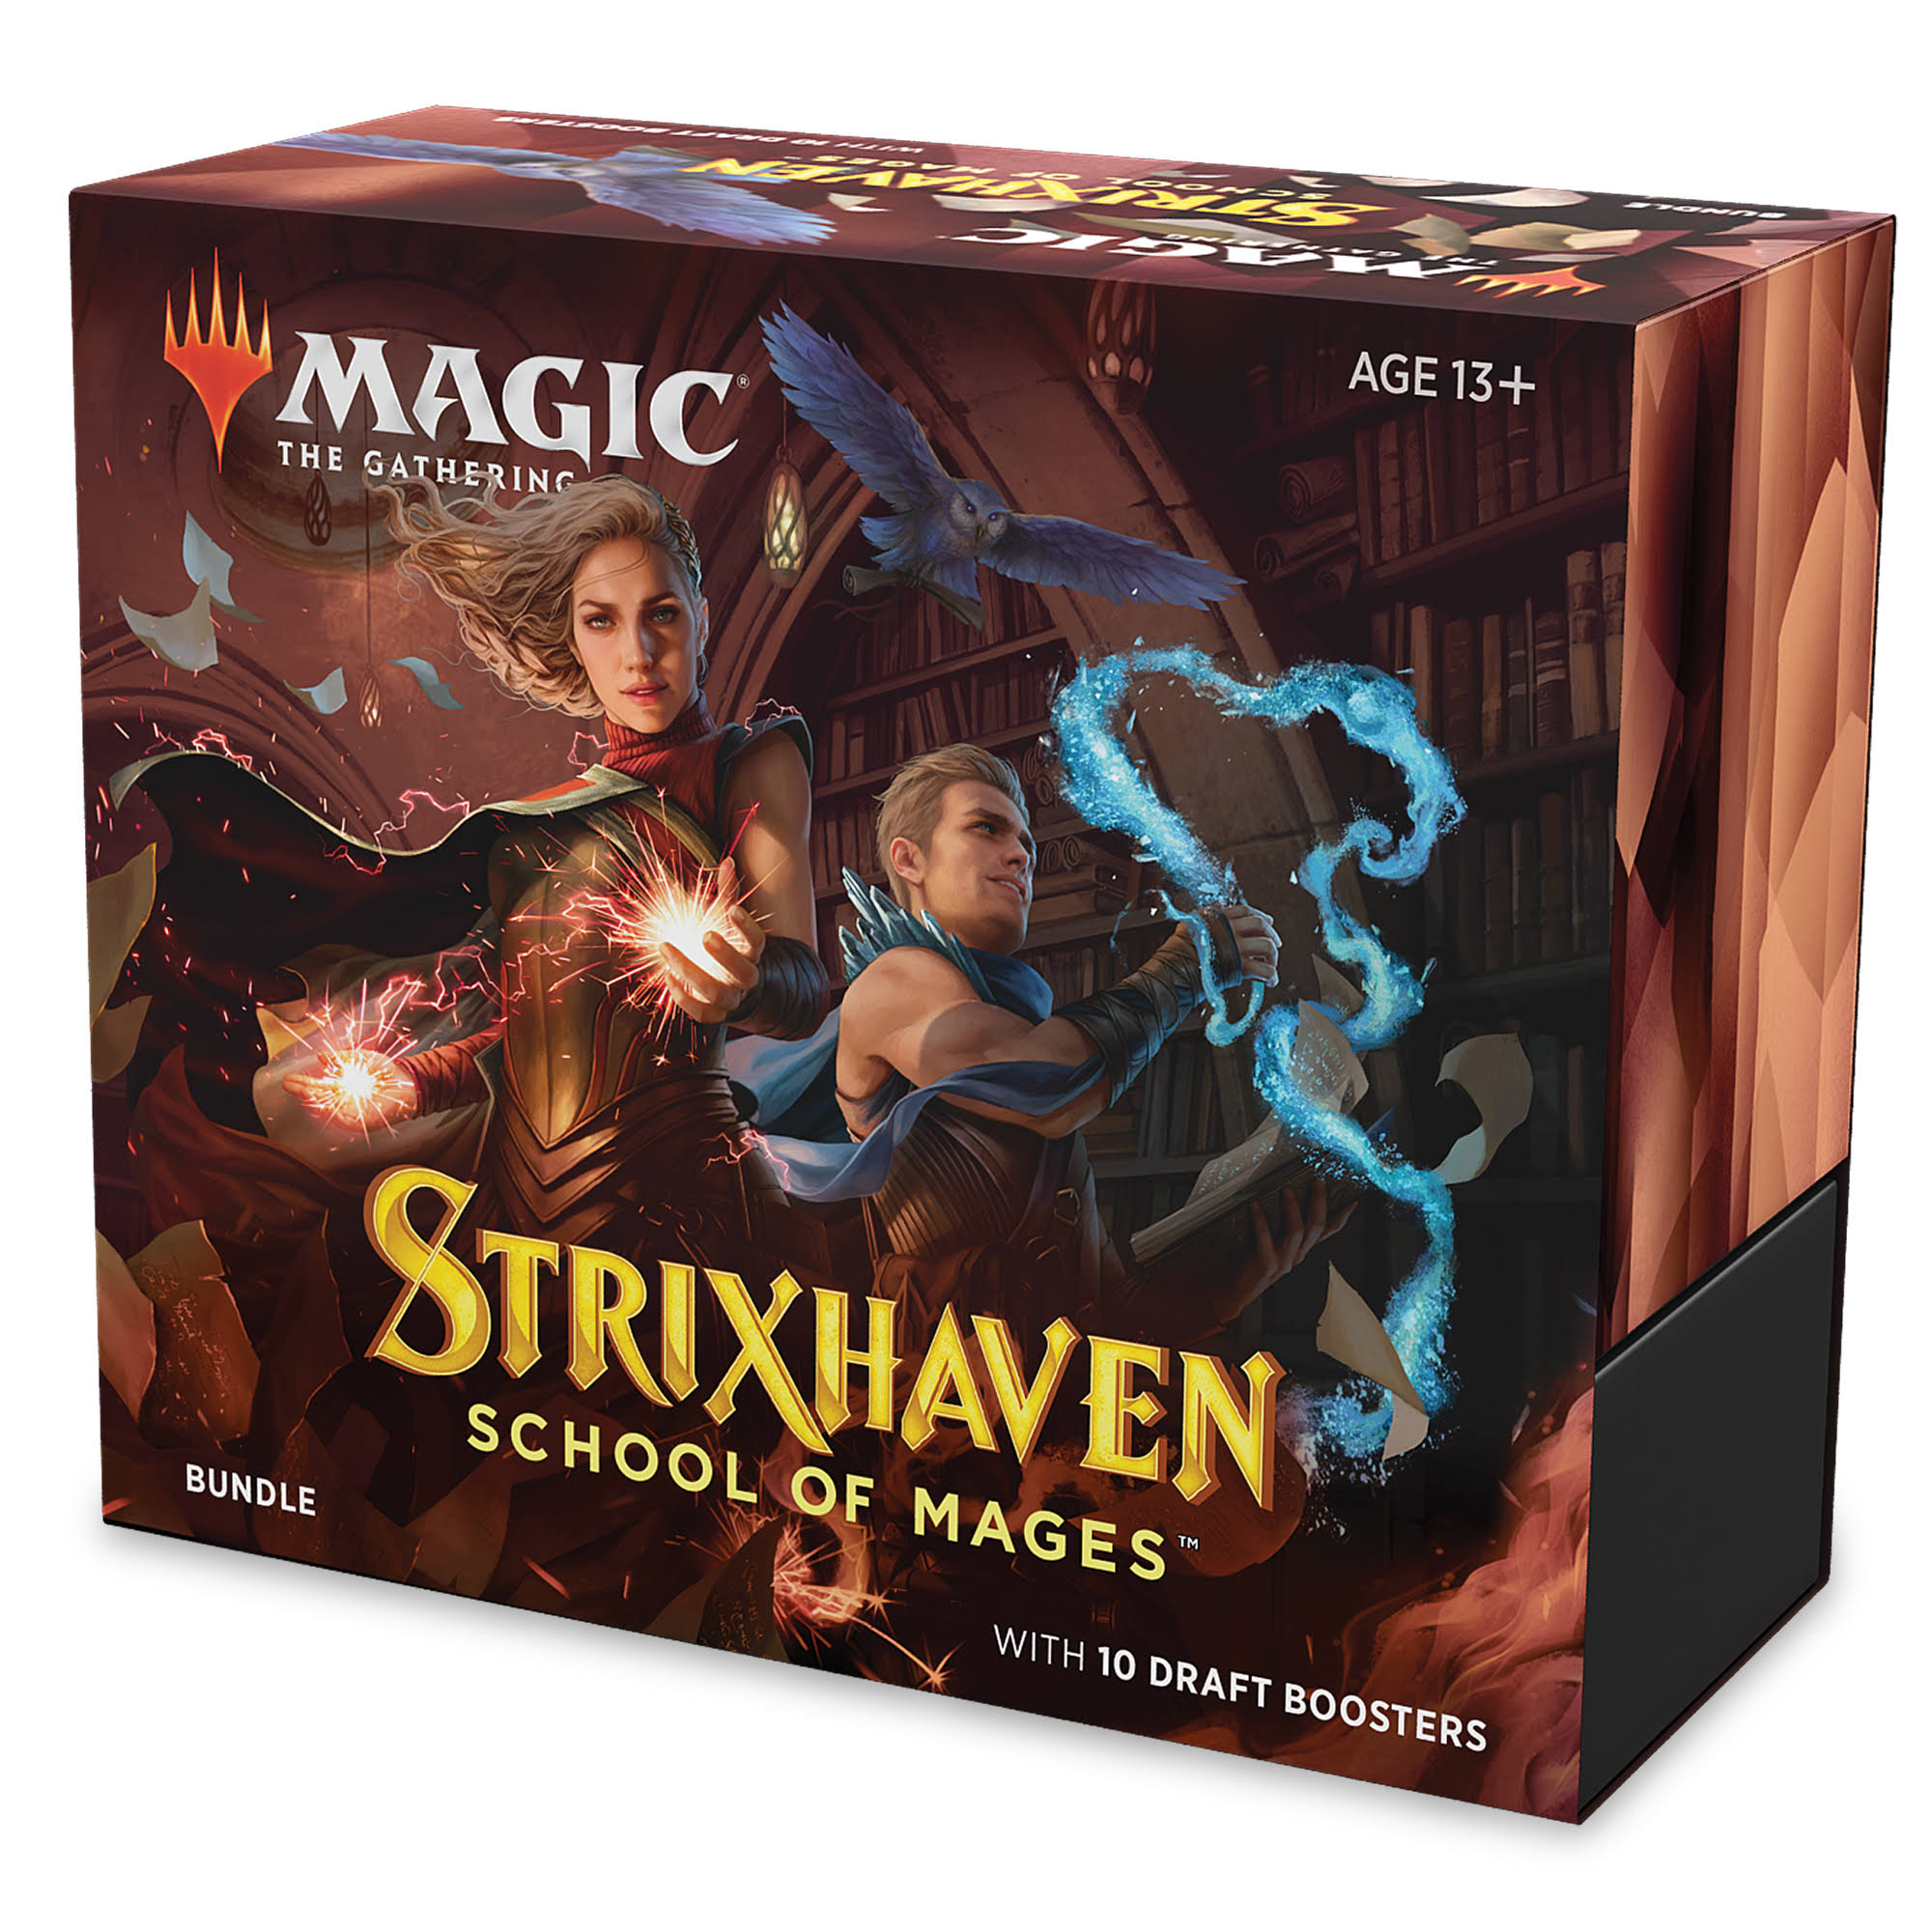 Magic The Gathering Strixhaven: School of Mages Bundle